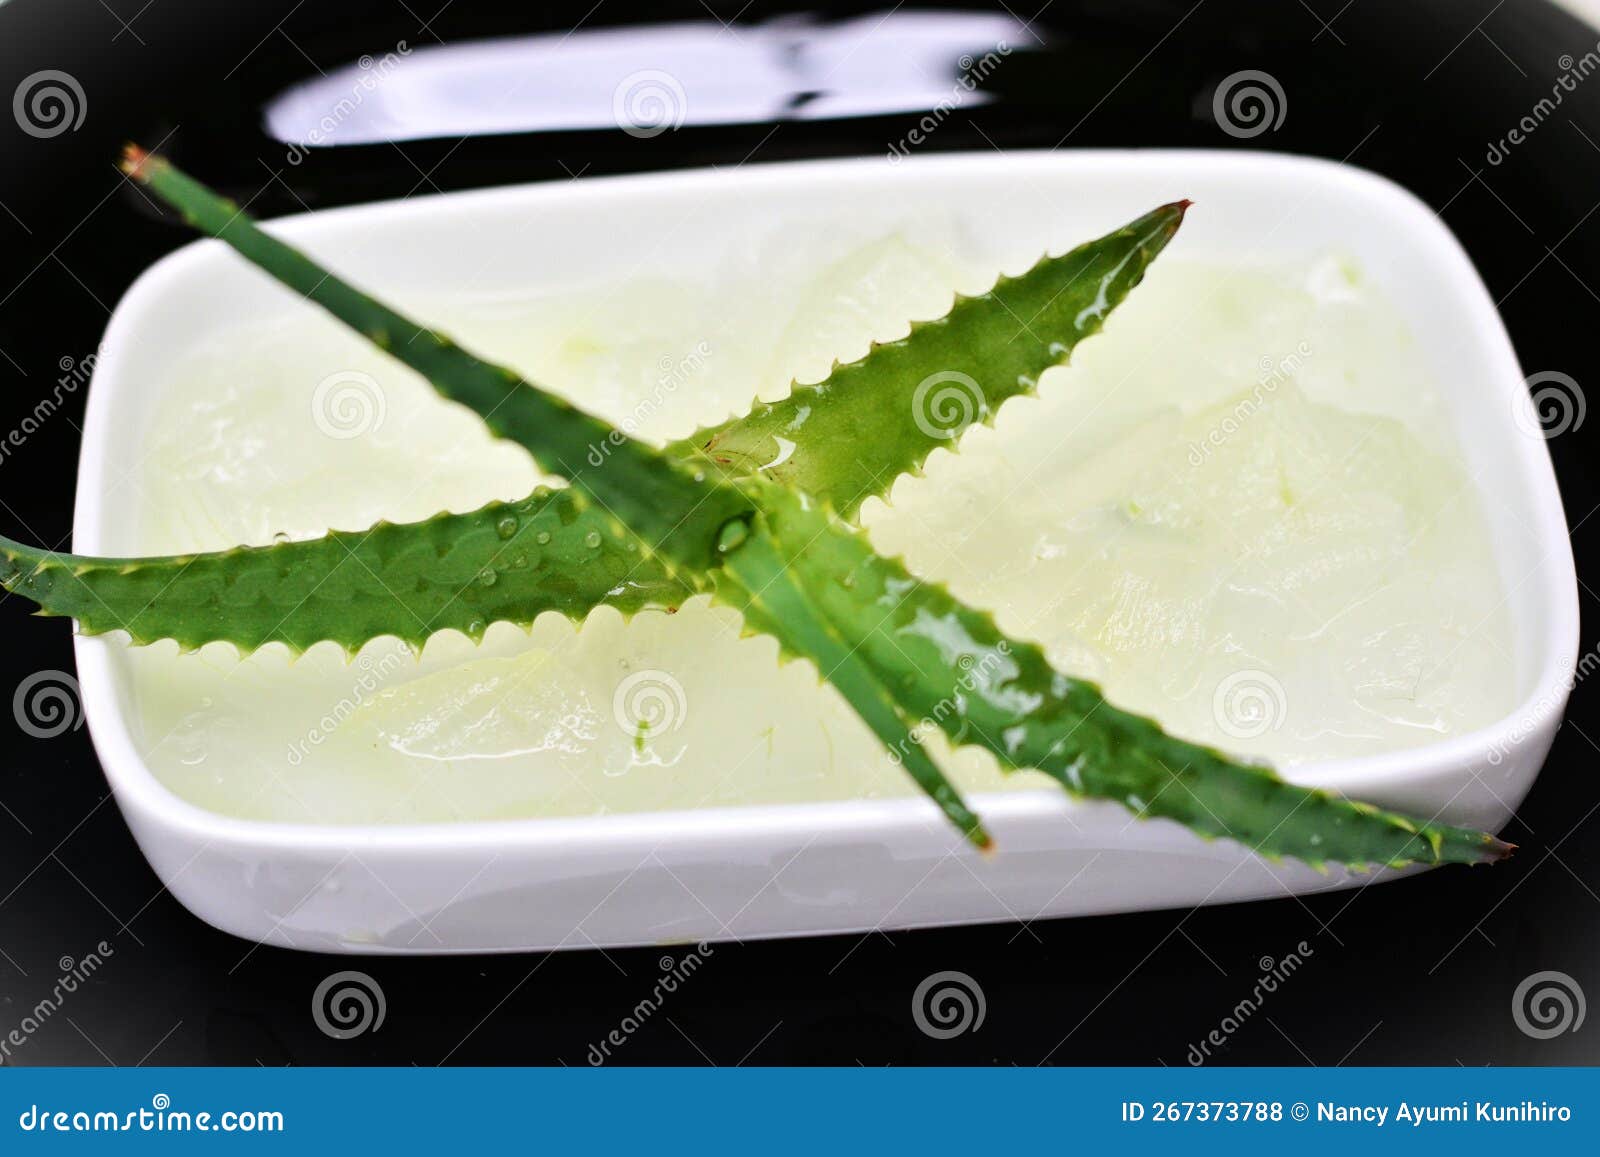 the aloe vera juice taken from the leaves in the bowl